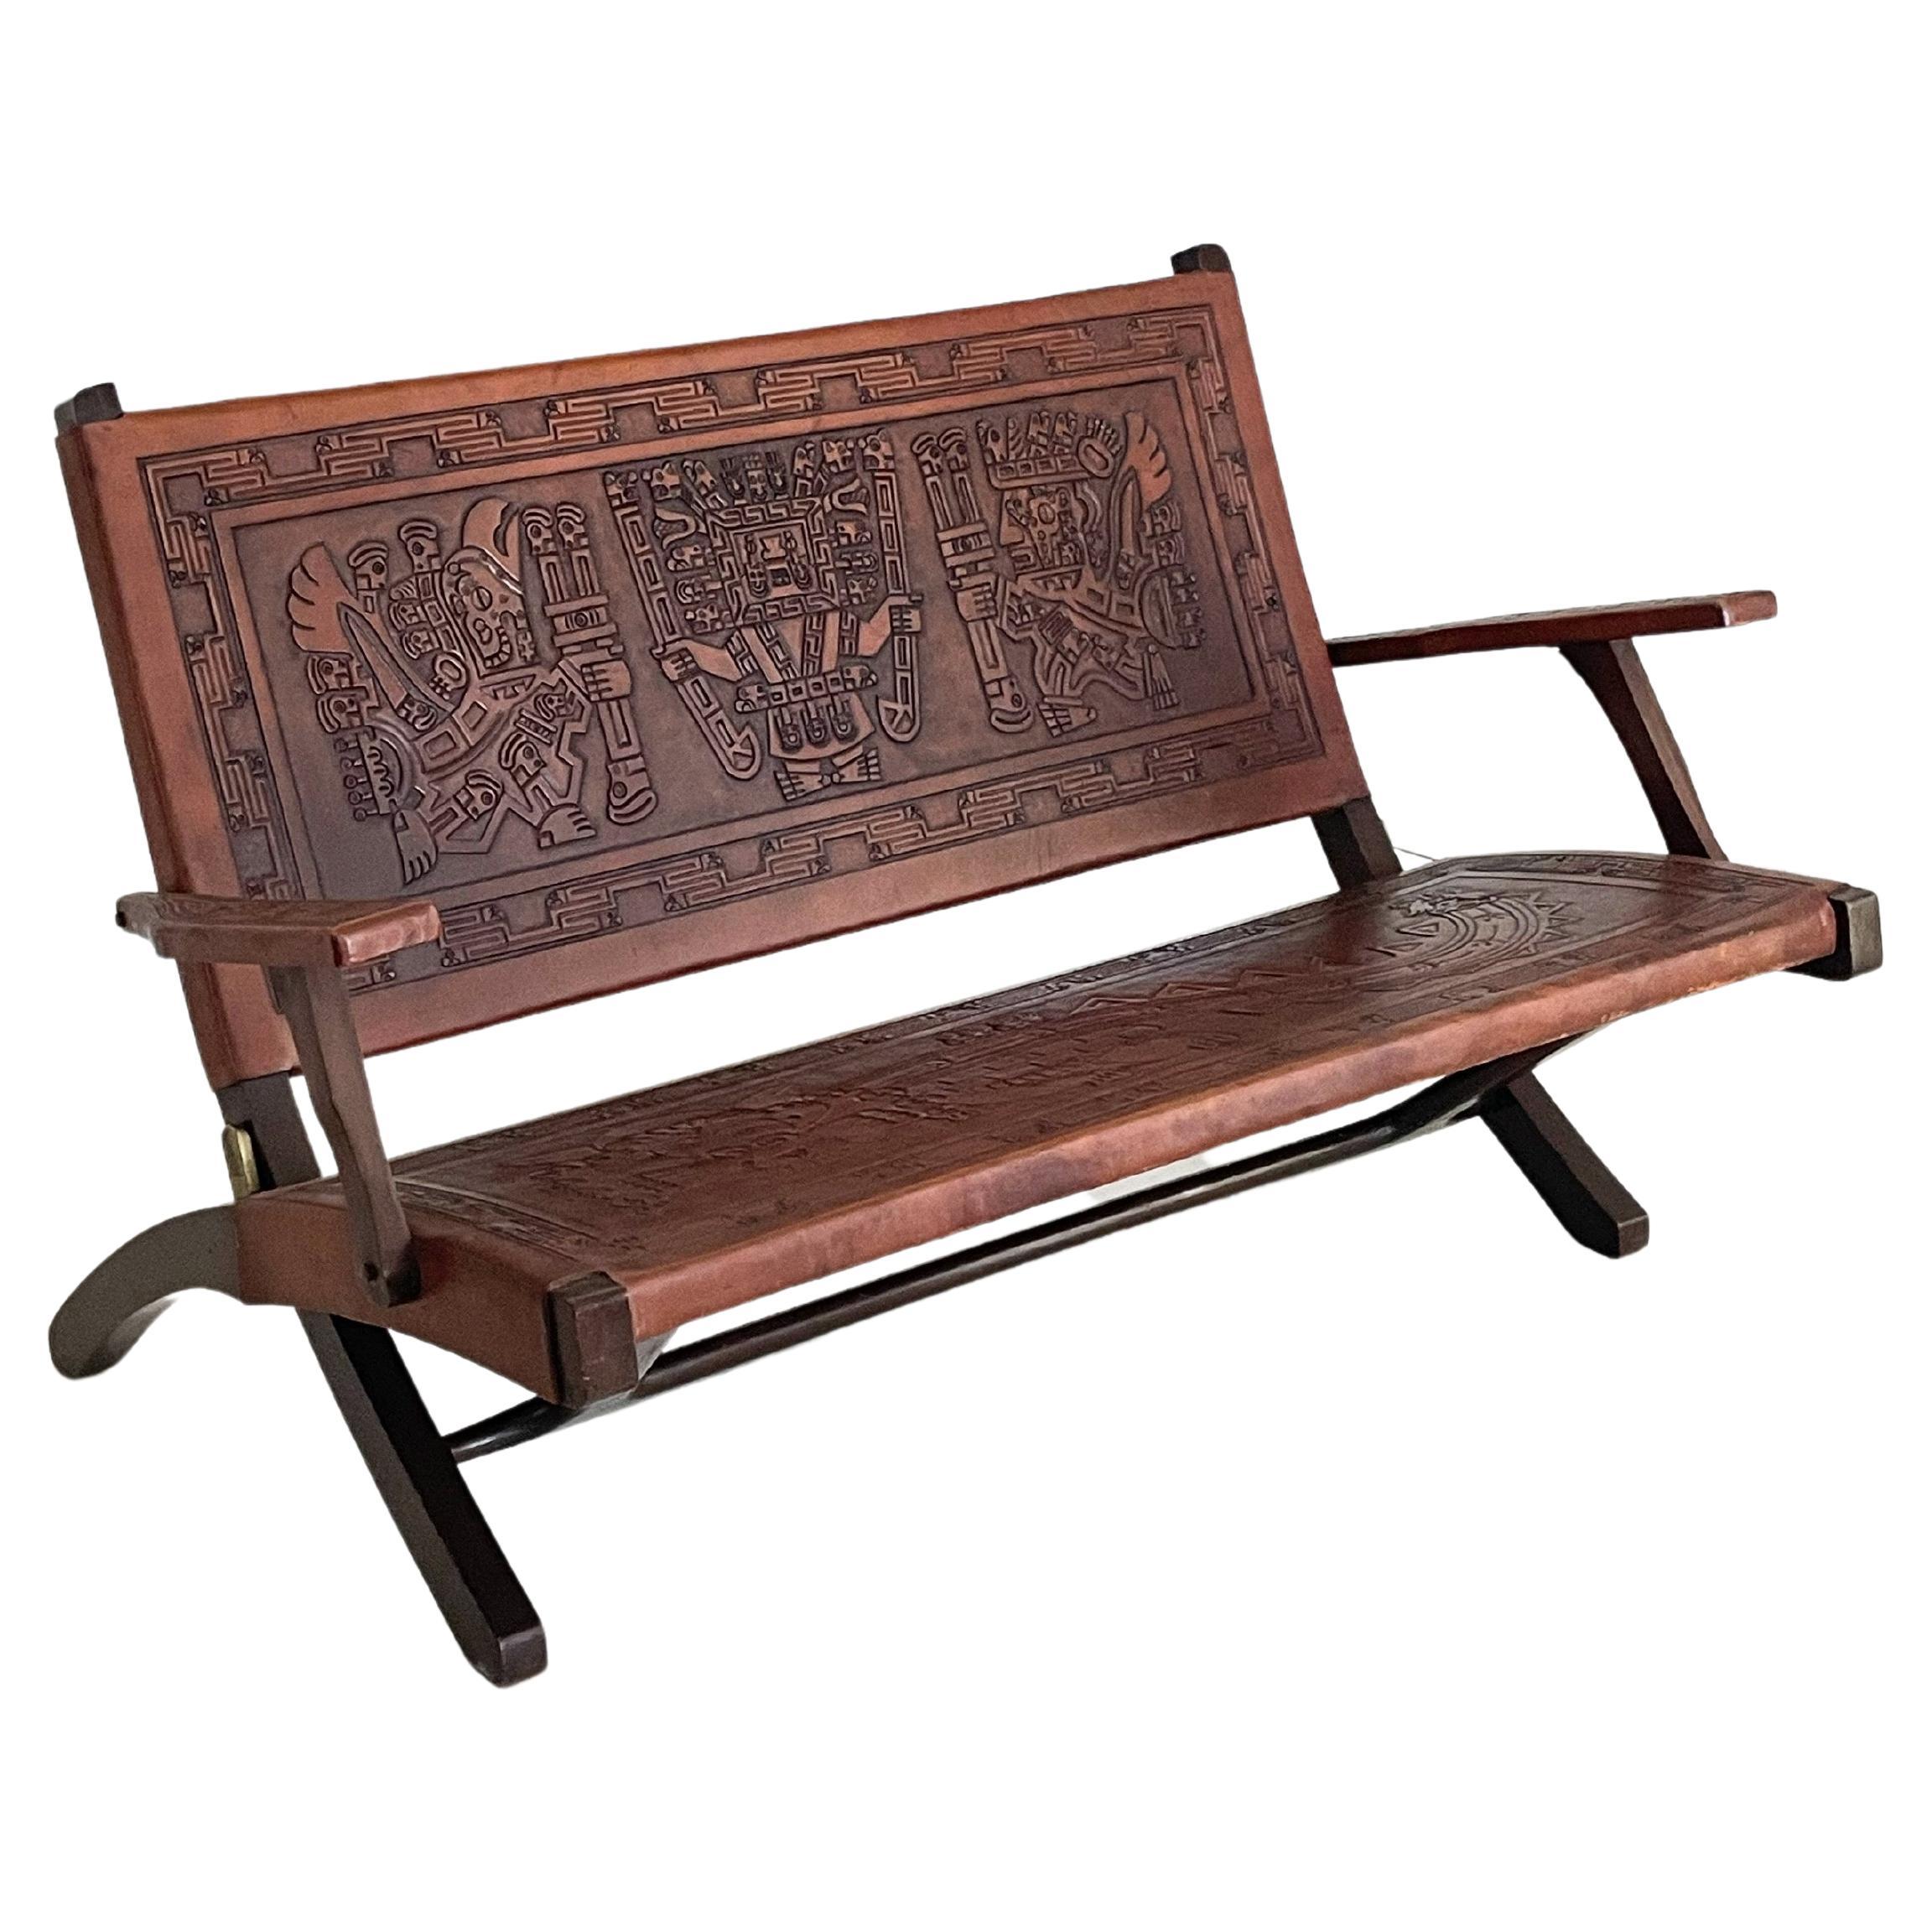 Angel Pazmino for Muebles de Estilo Tooled leather folding bench circa 1965, Ecuador, with mahogany bench, instrumental leather pattern of Mayan figures Condition: good, leather, shows general slight wear appropriate to age and normal use, small